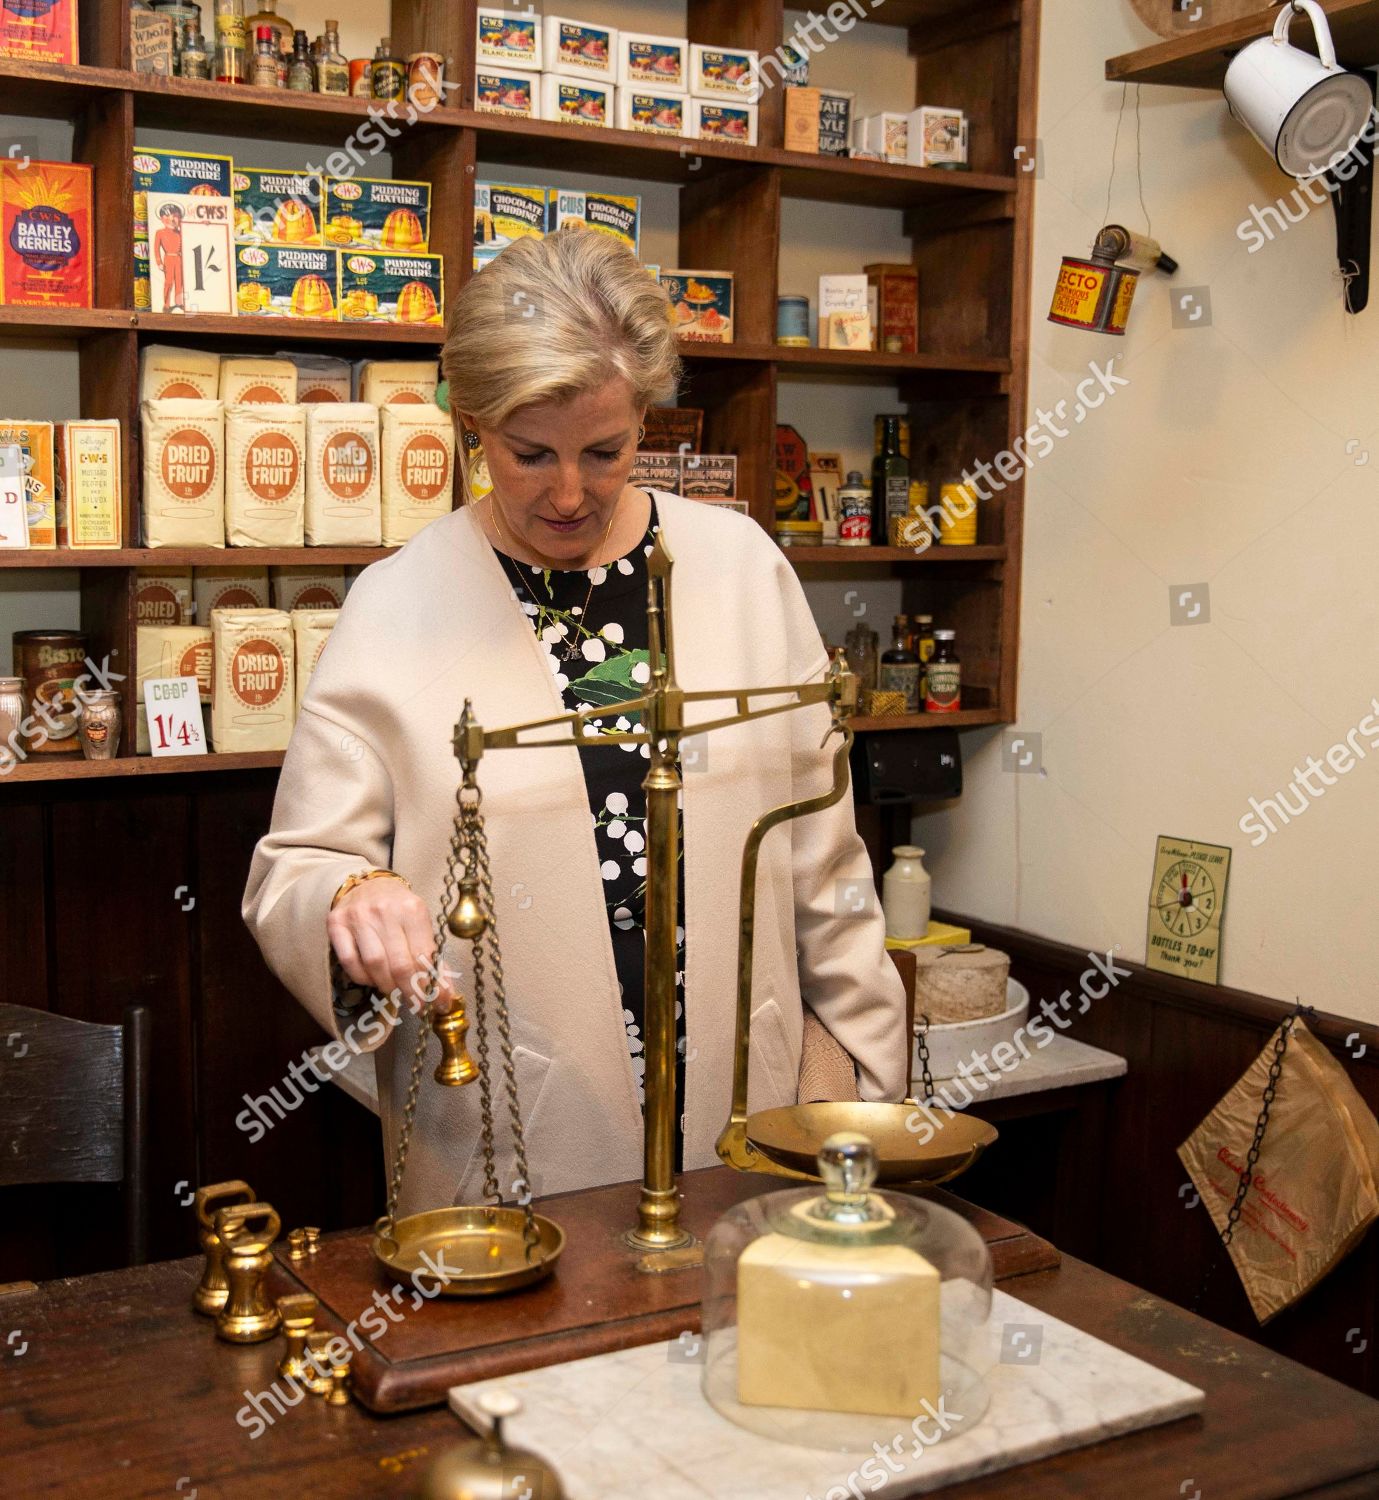 countess-of-wessex-visit-to-somerset-uk-shutterstock-editorial-10120499am.jpg